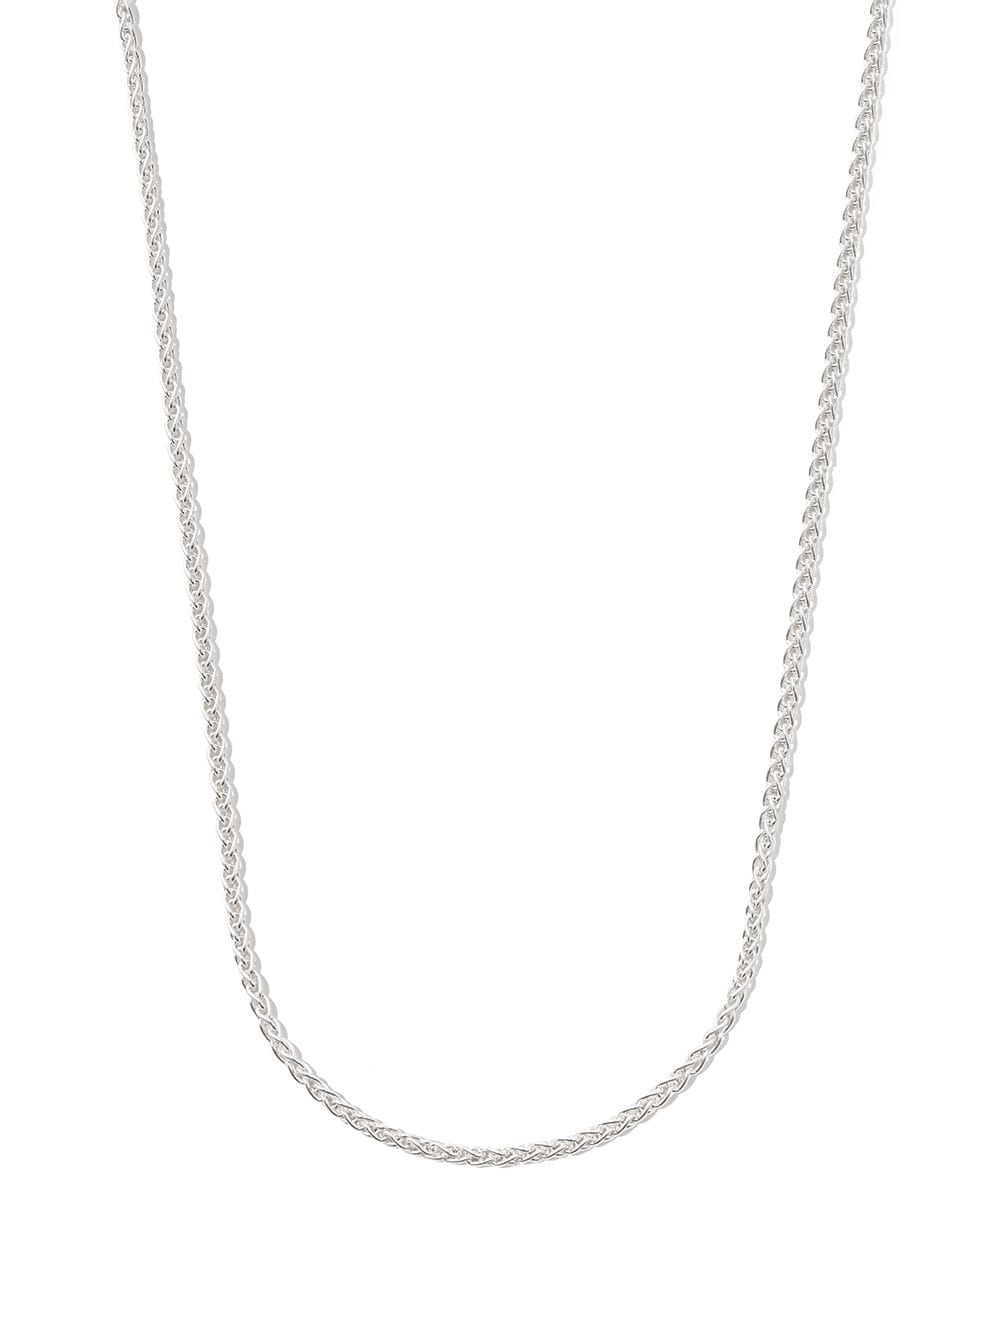 HATTON LABS ROPE CHAIN NECKLACE